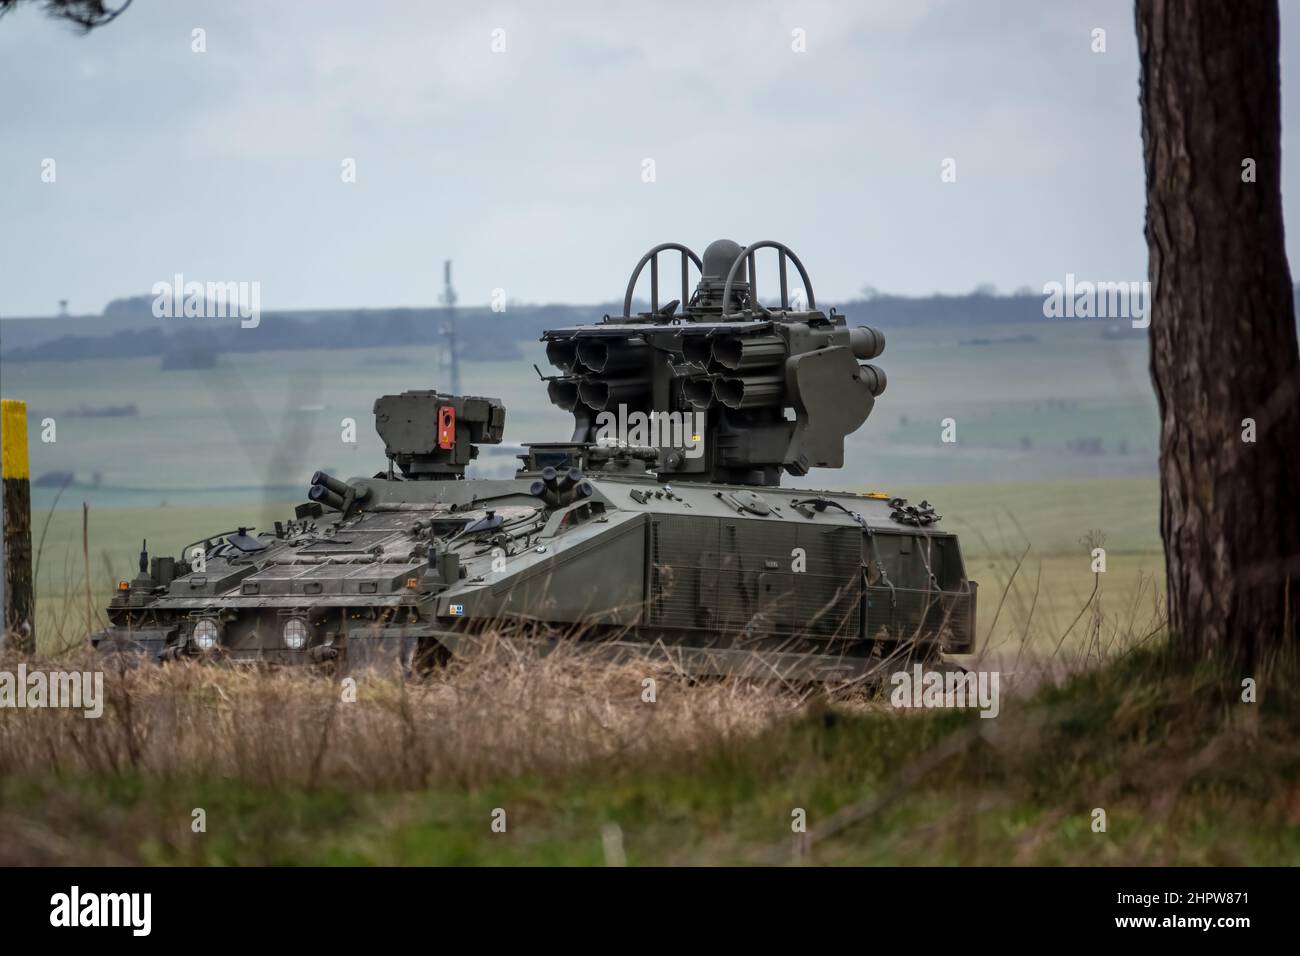 British Army Alvis Starstreak Stormer CVRT tracked armoured vehicle on military exercise, equipped with the short range HVM air defense missile system Stock Photo